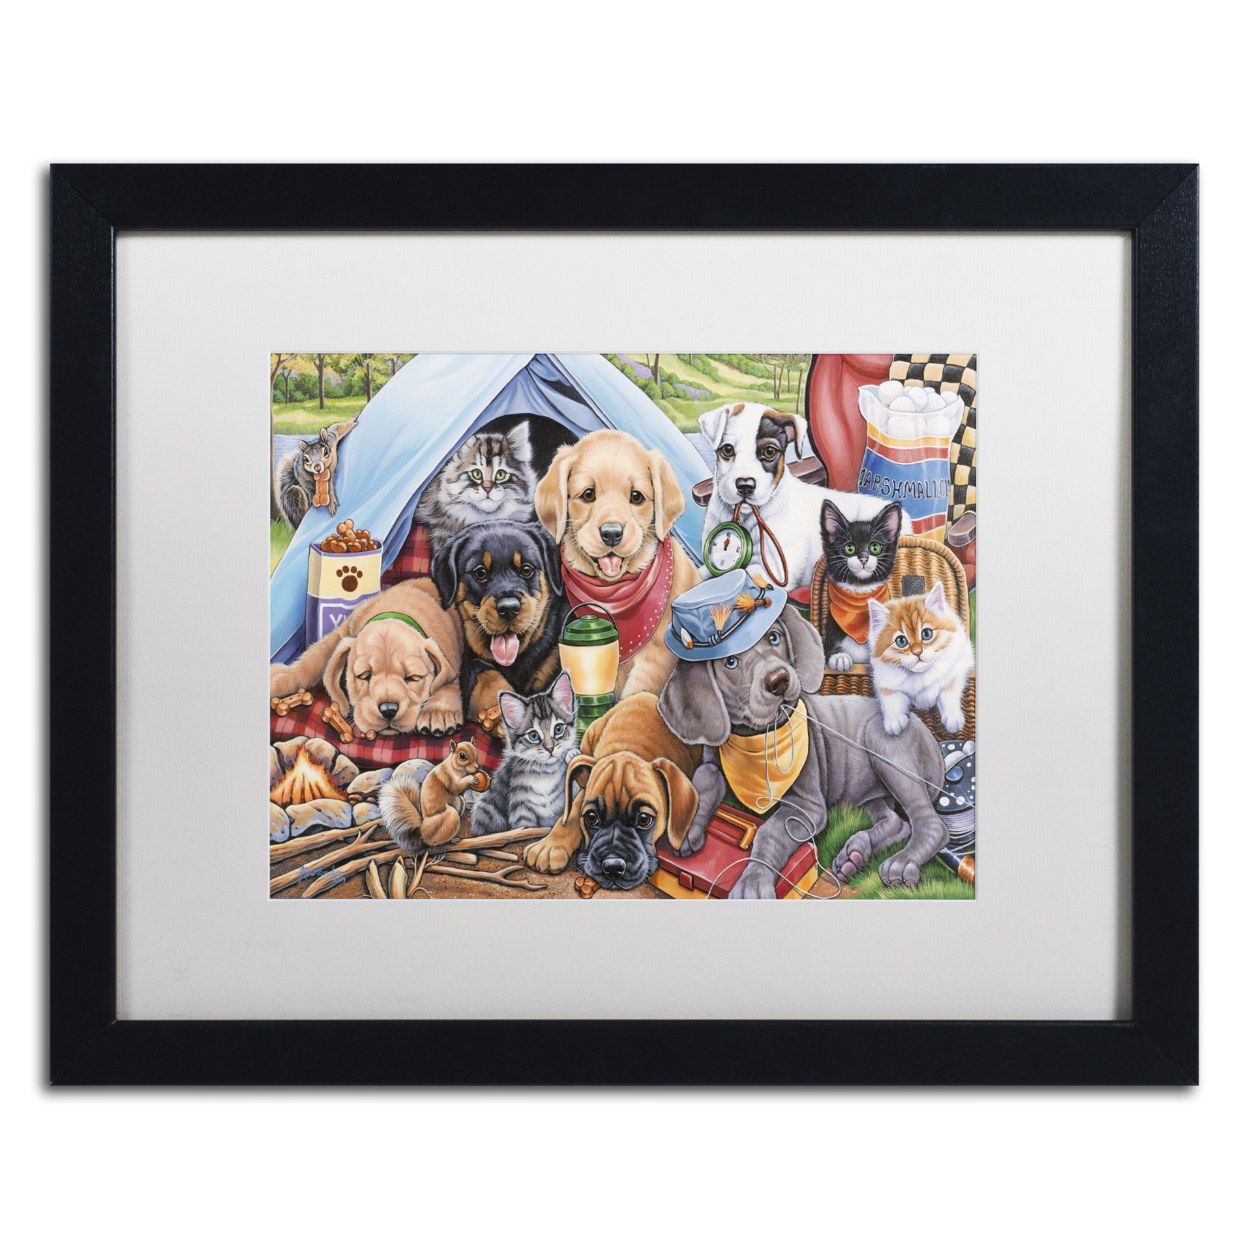 Jenny Newland 'Camping Buddies' Black Wooden Framed Art 18 X 22 Inches